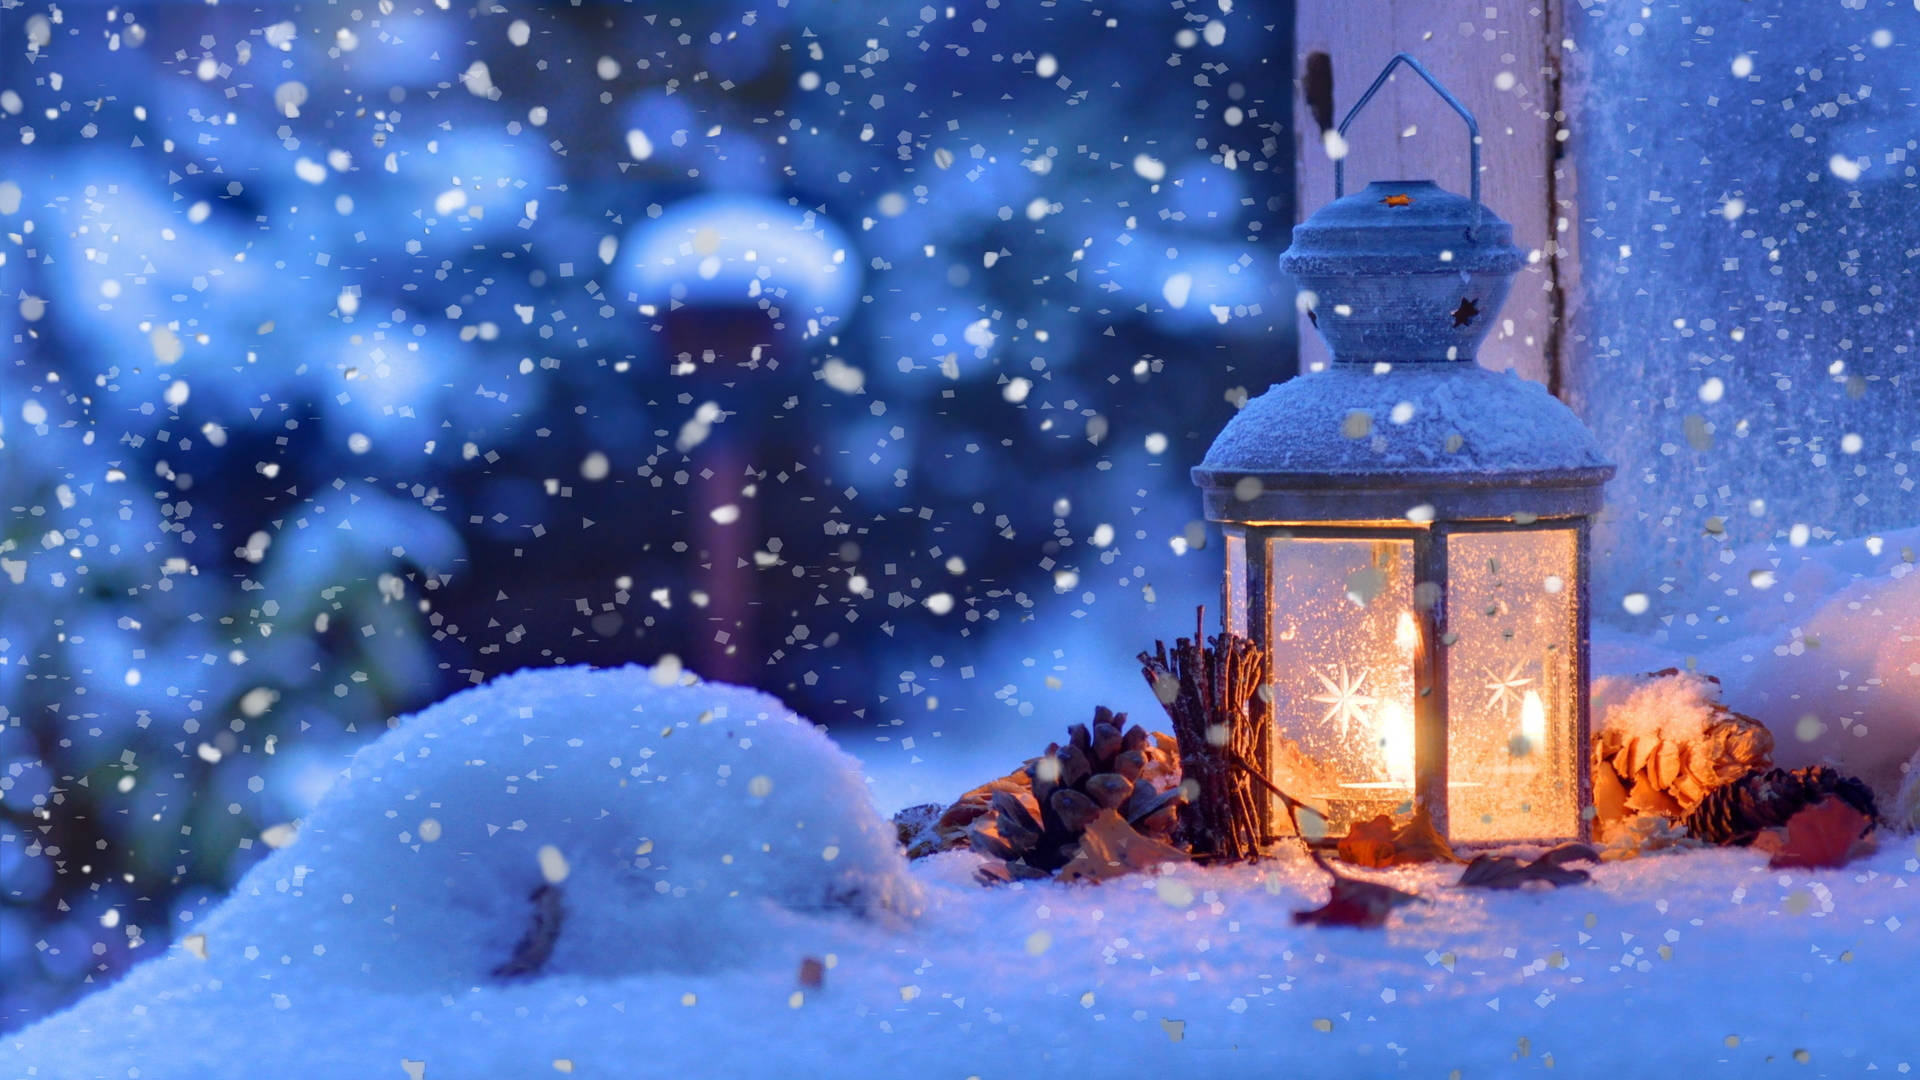 Celebrate a magical snowy Christmas! Wallpaper